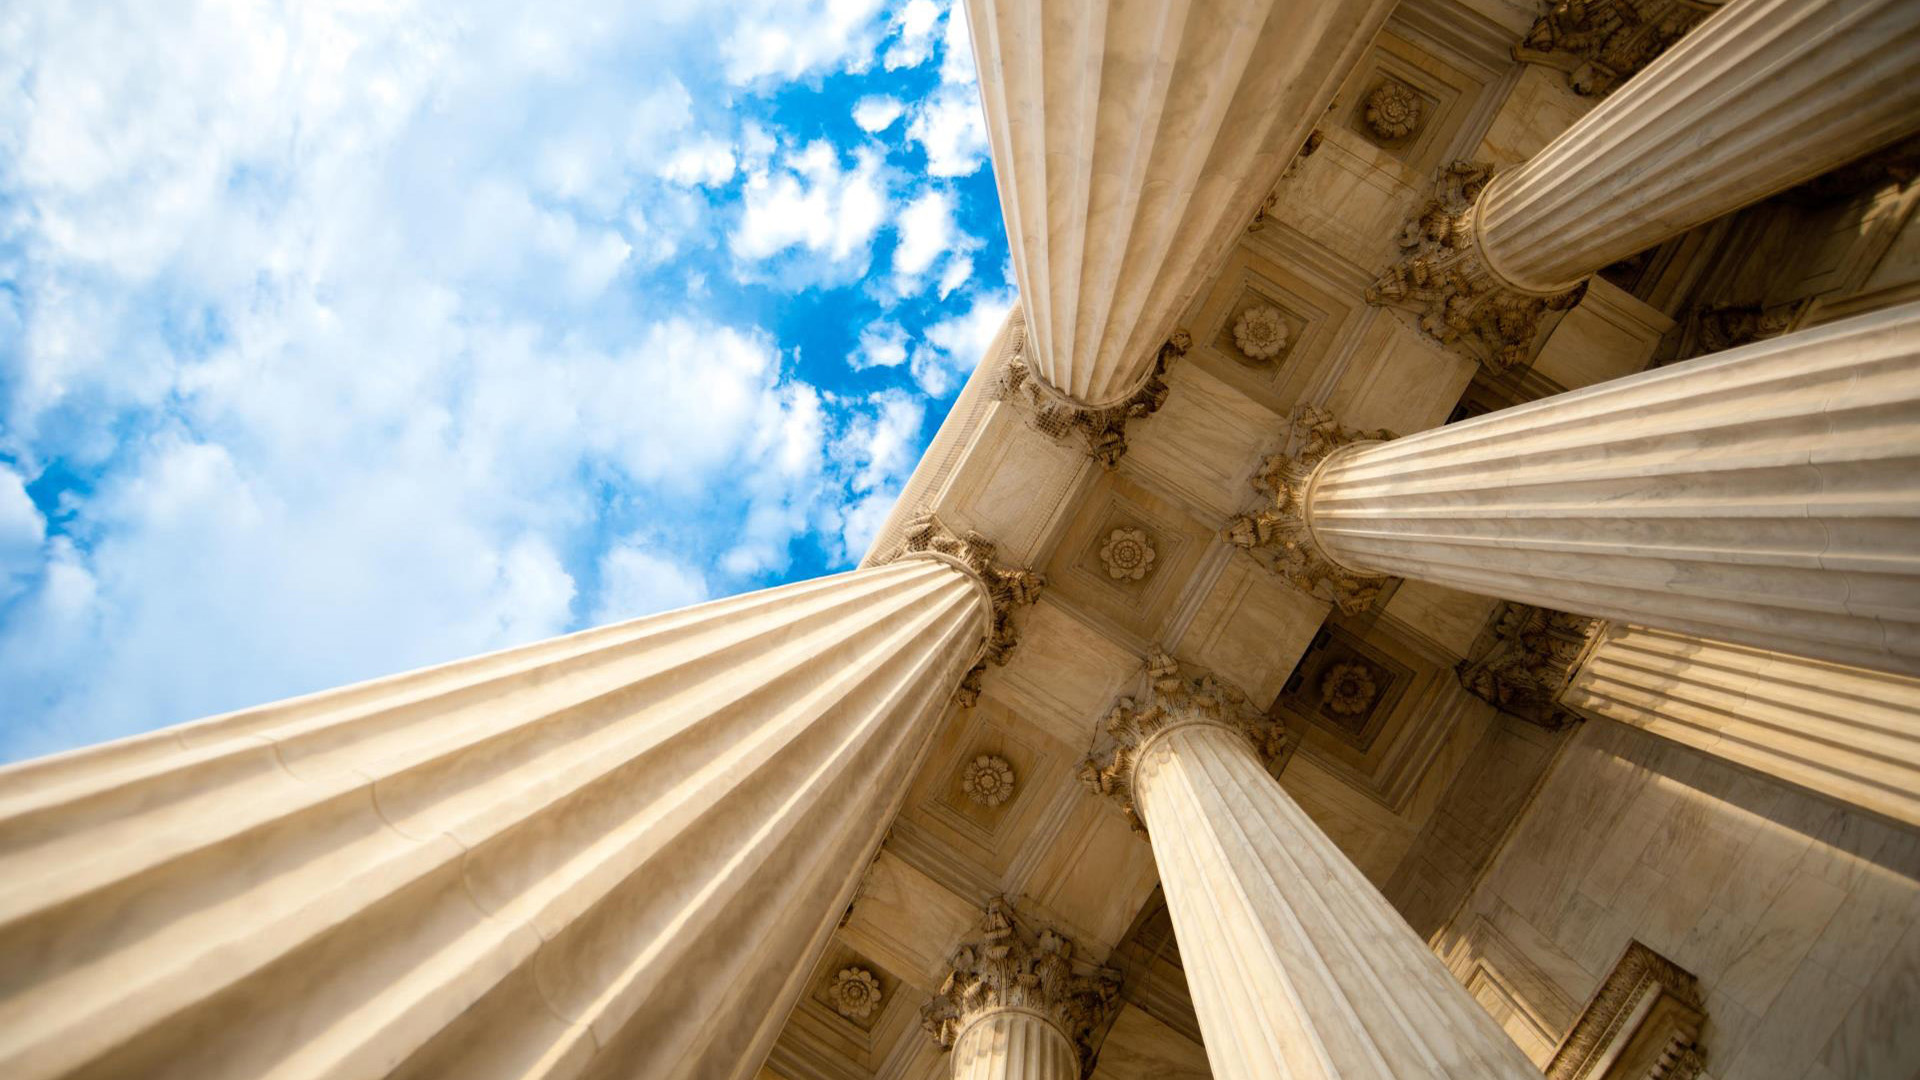 United States Supreme Court sidesteps discovery rule question and allows copyright owners to recover damages without time limit